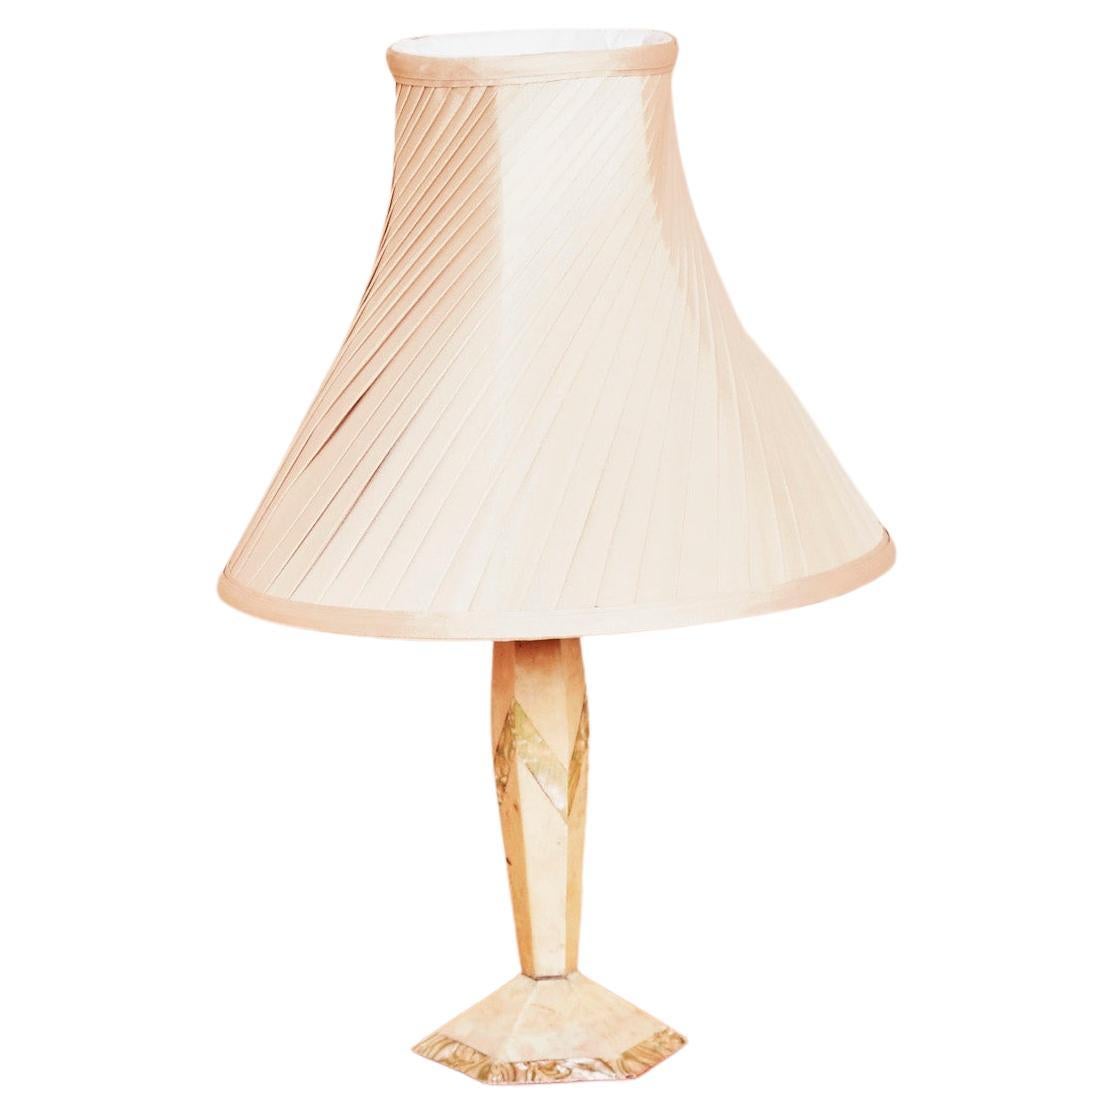 Art Deco Table Lamp With Mother Of Pearl Inlay And Pleated Shade, 1930s For Sale